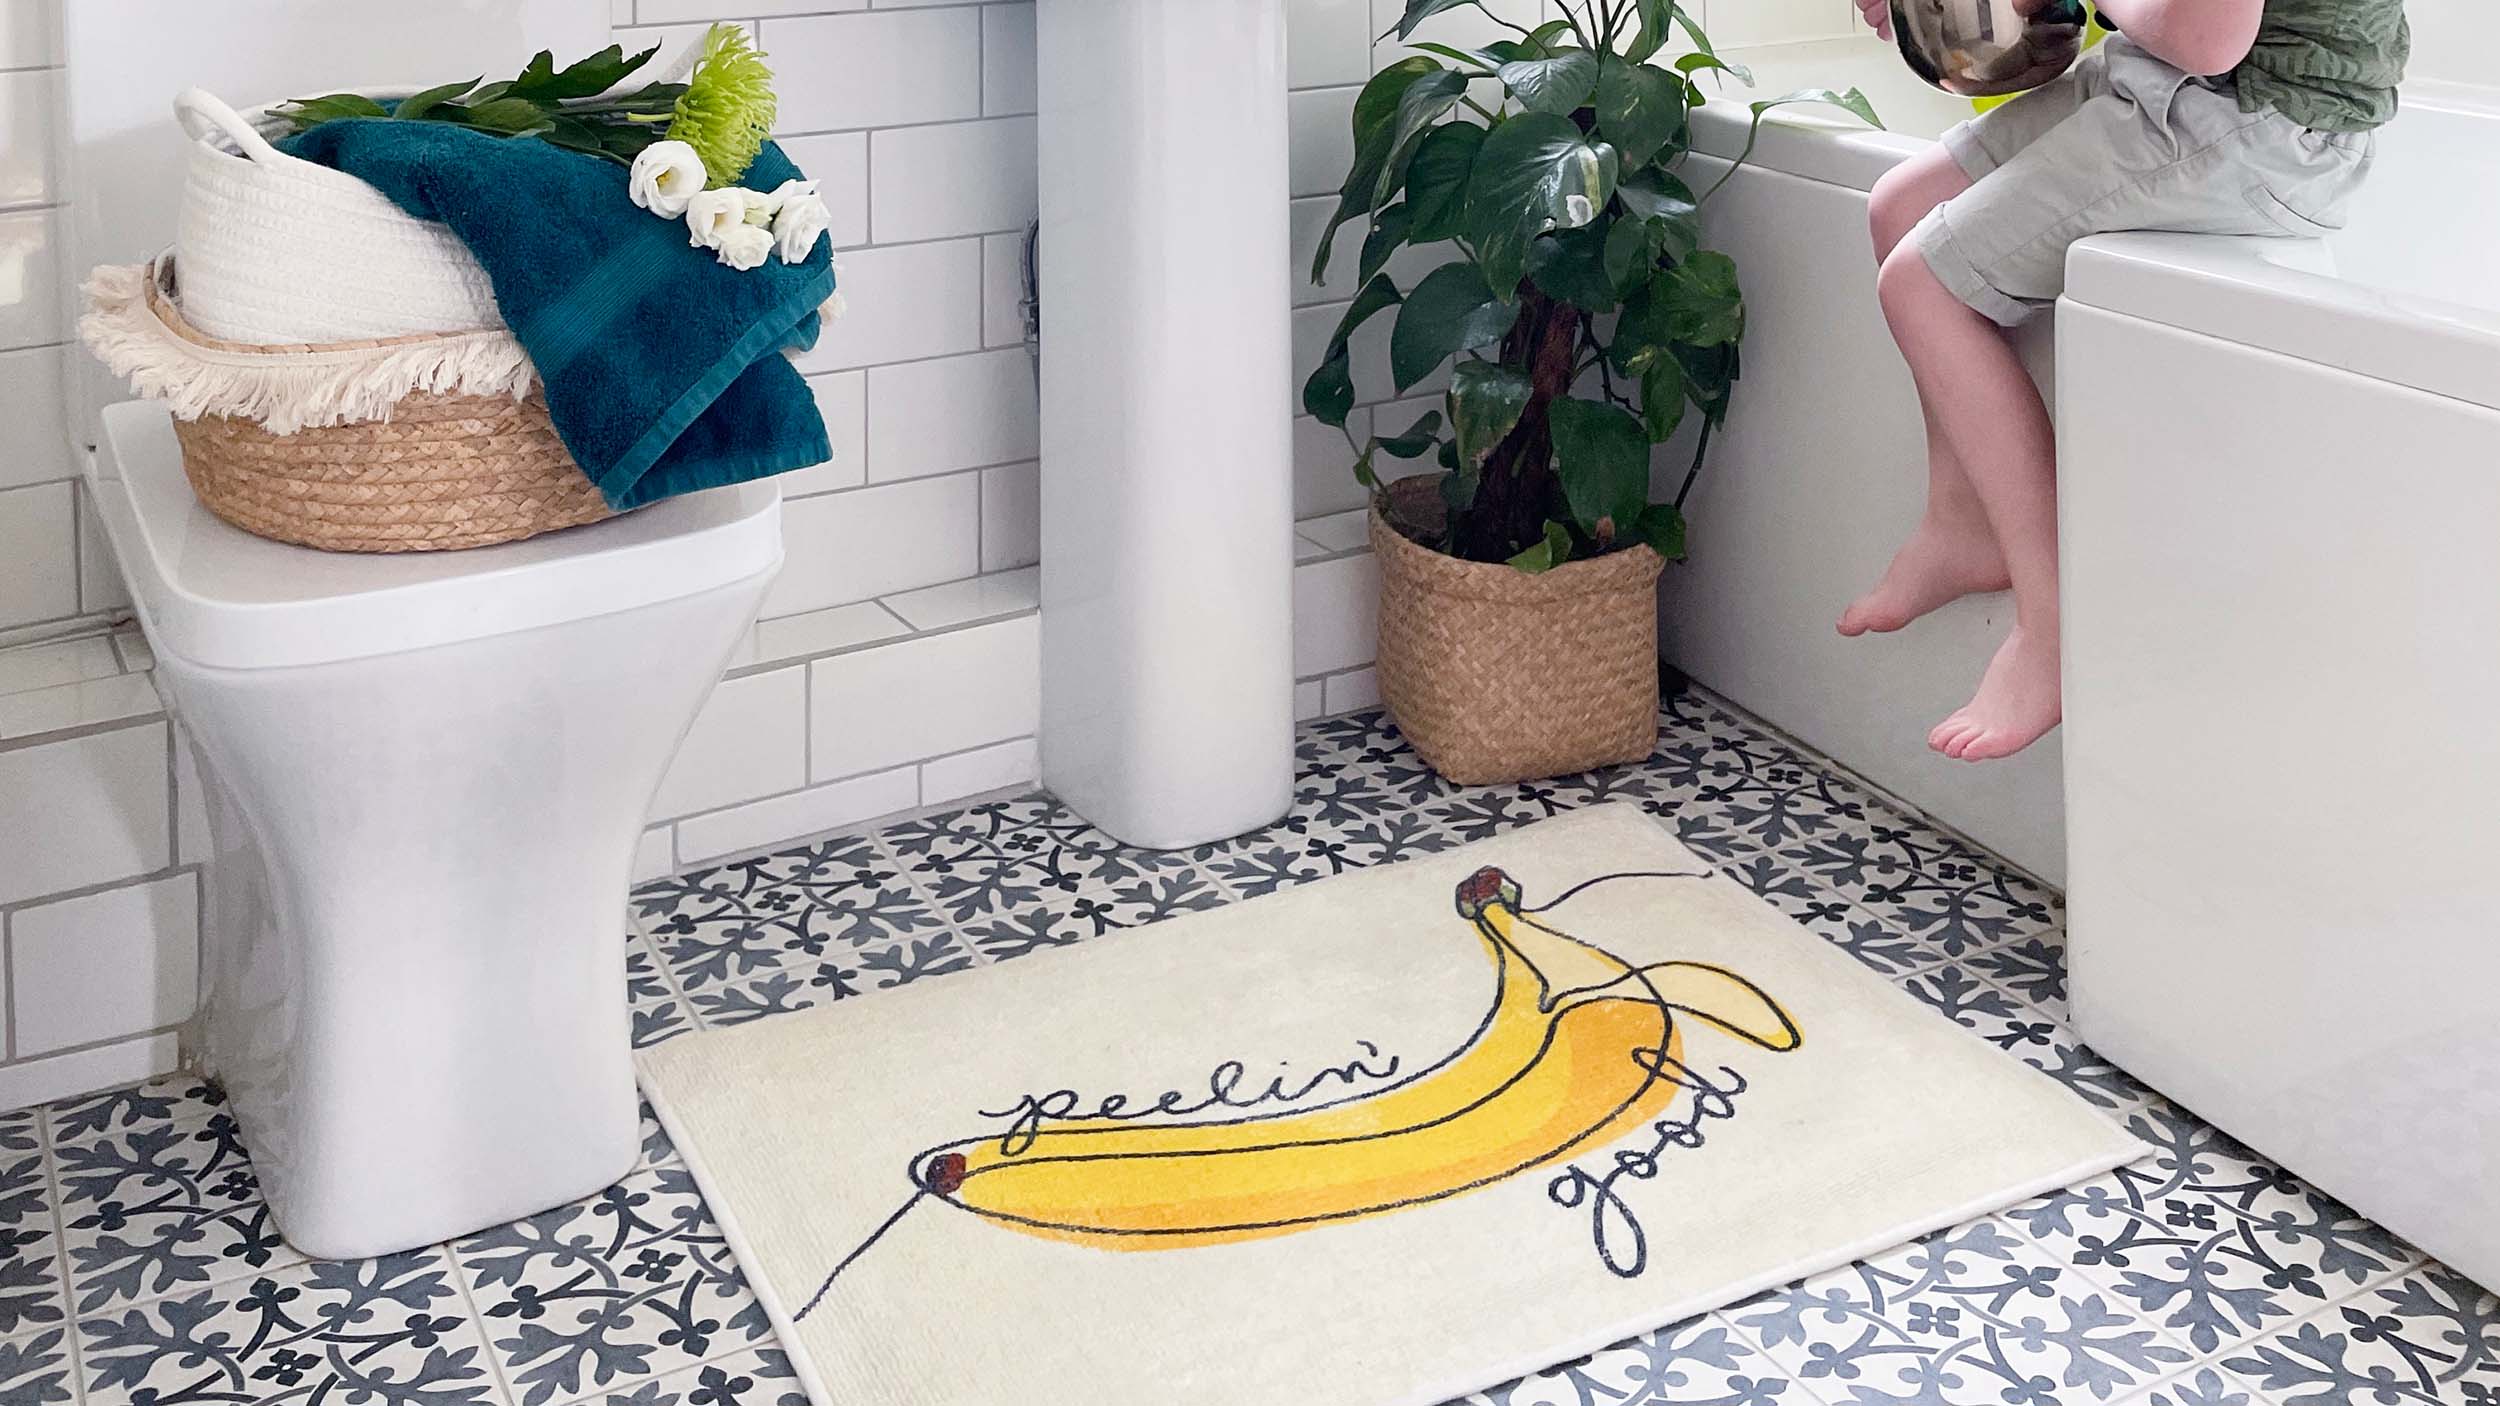 Ruggable Just Launched a New Collection of Bath Mats